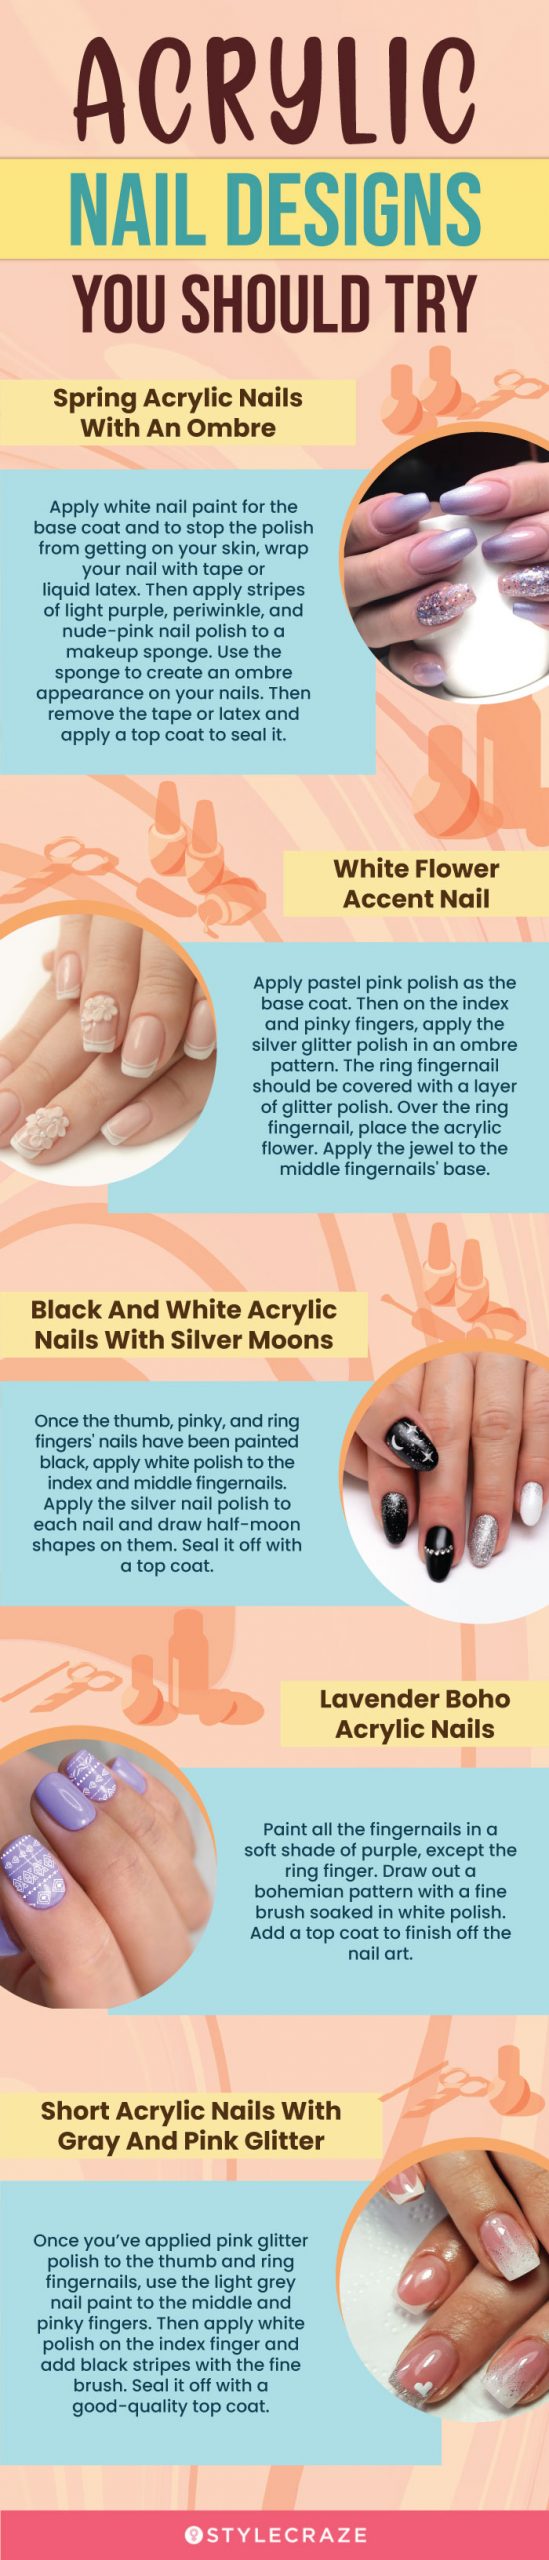 acrylic nail designs you should try (infographic)